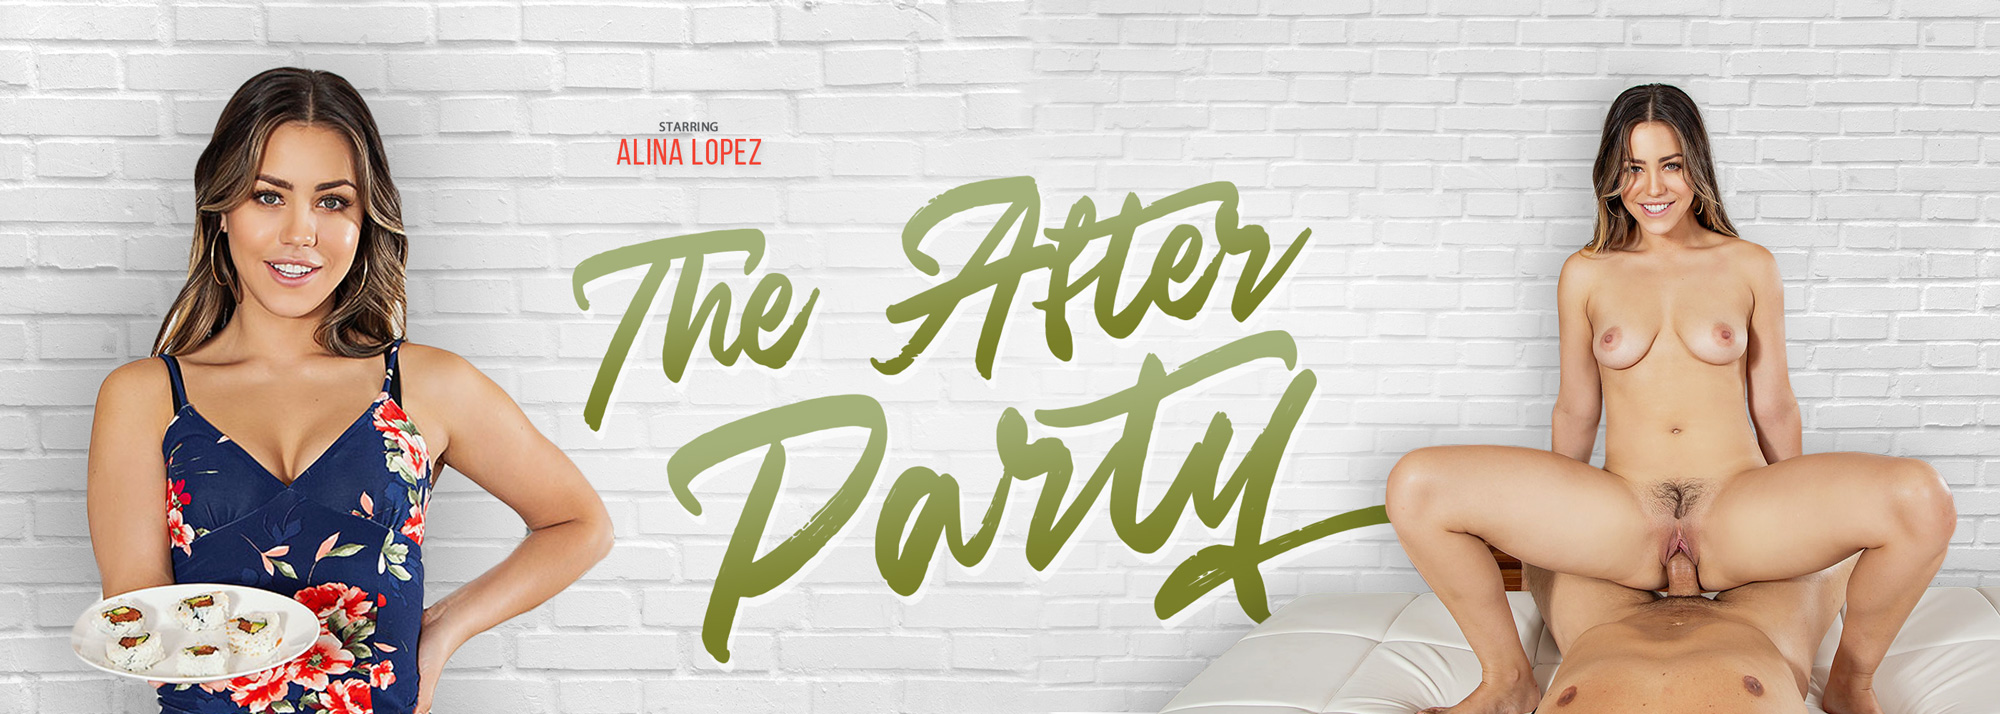 The After Party with Alina Lopez  Slideshow